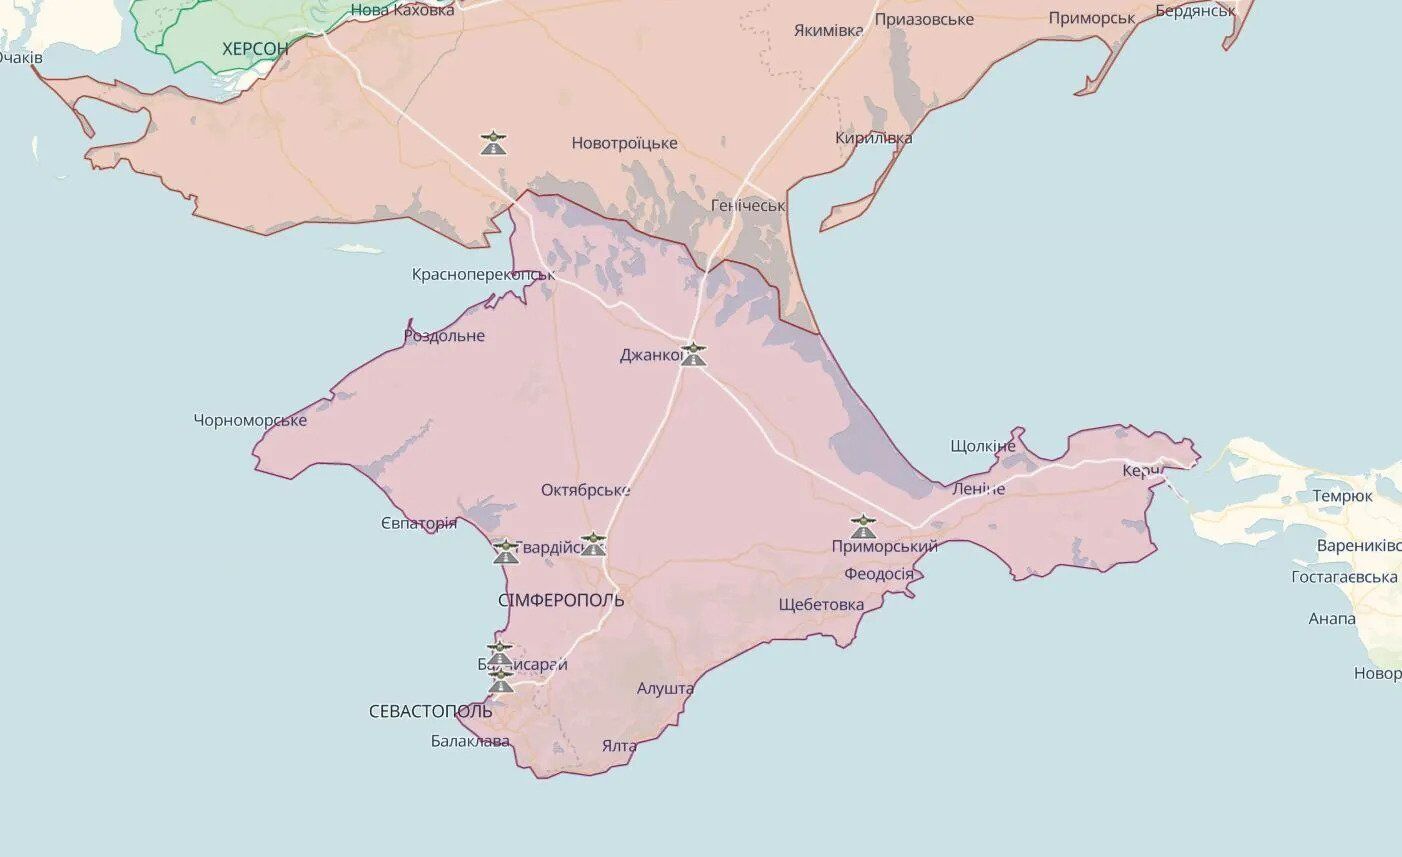 Panic in occupied Crimea is growing, invaders intensify mobilization – National Resistance Center